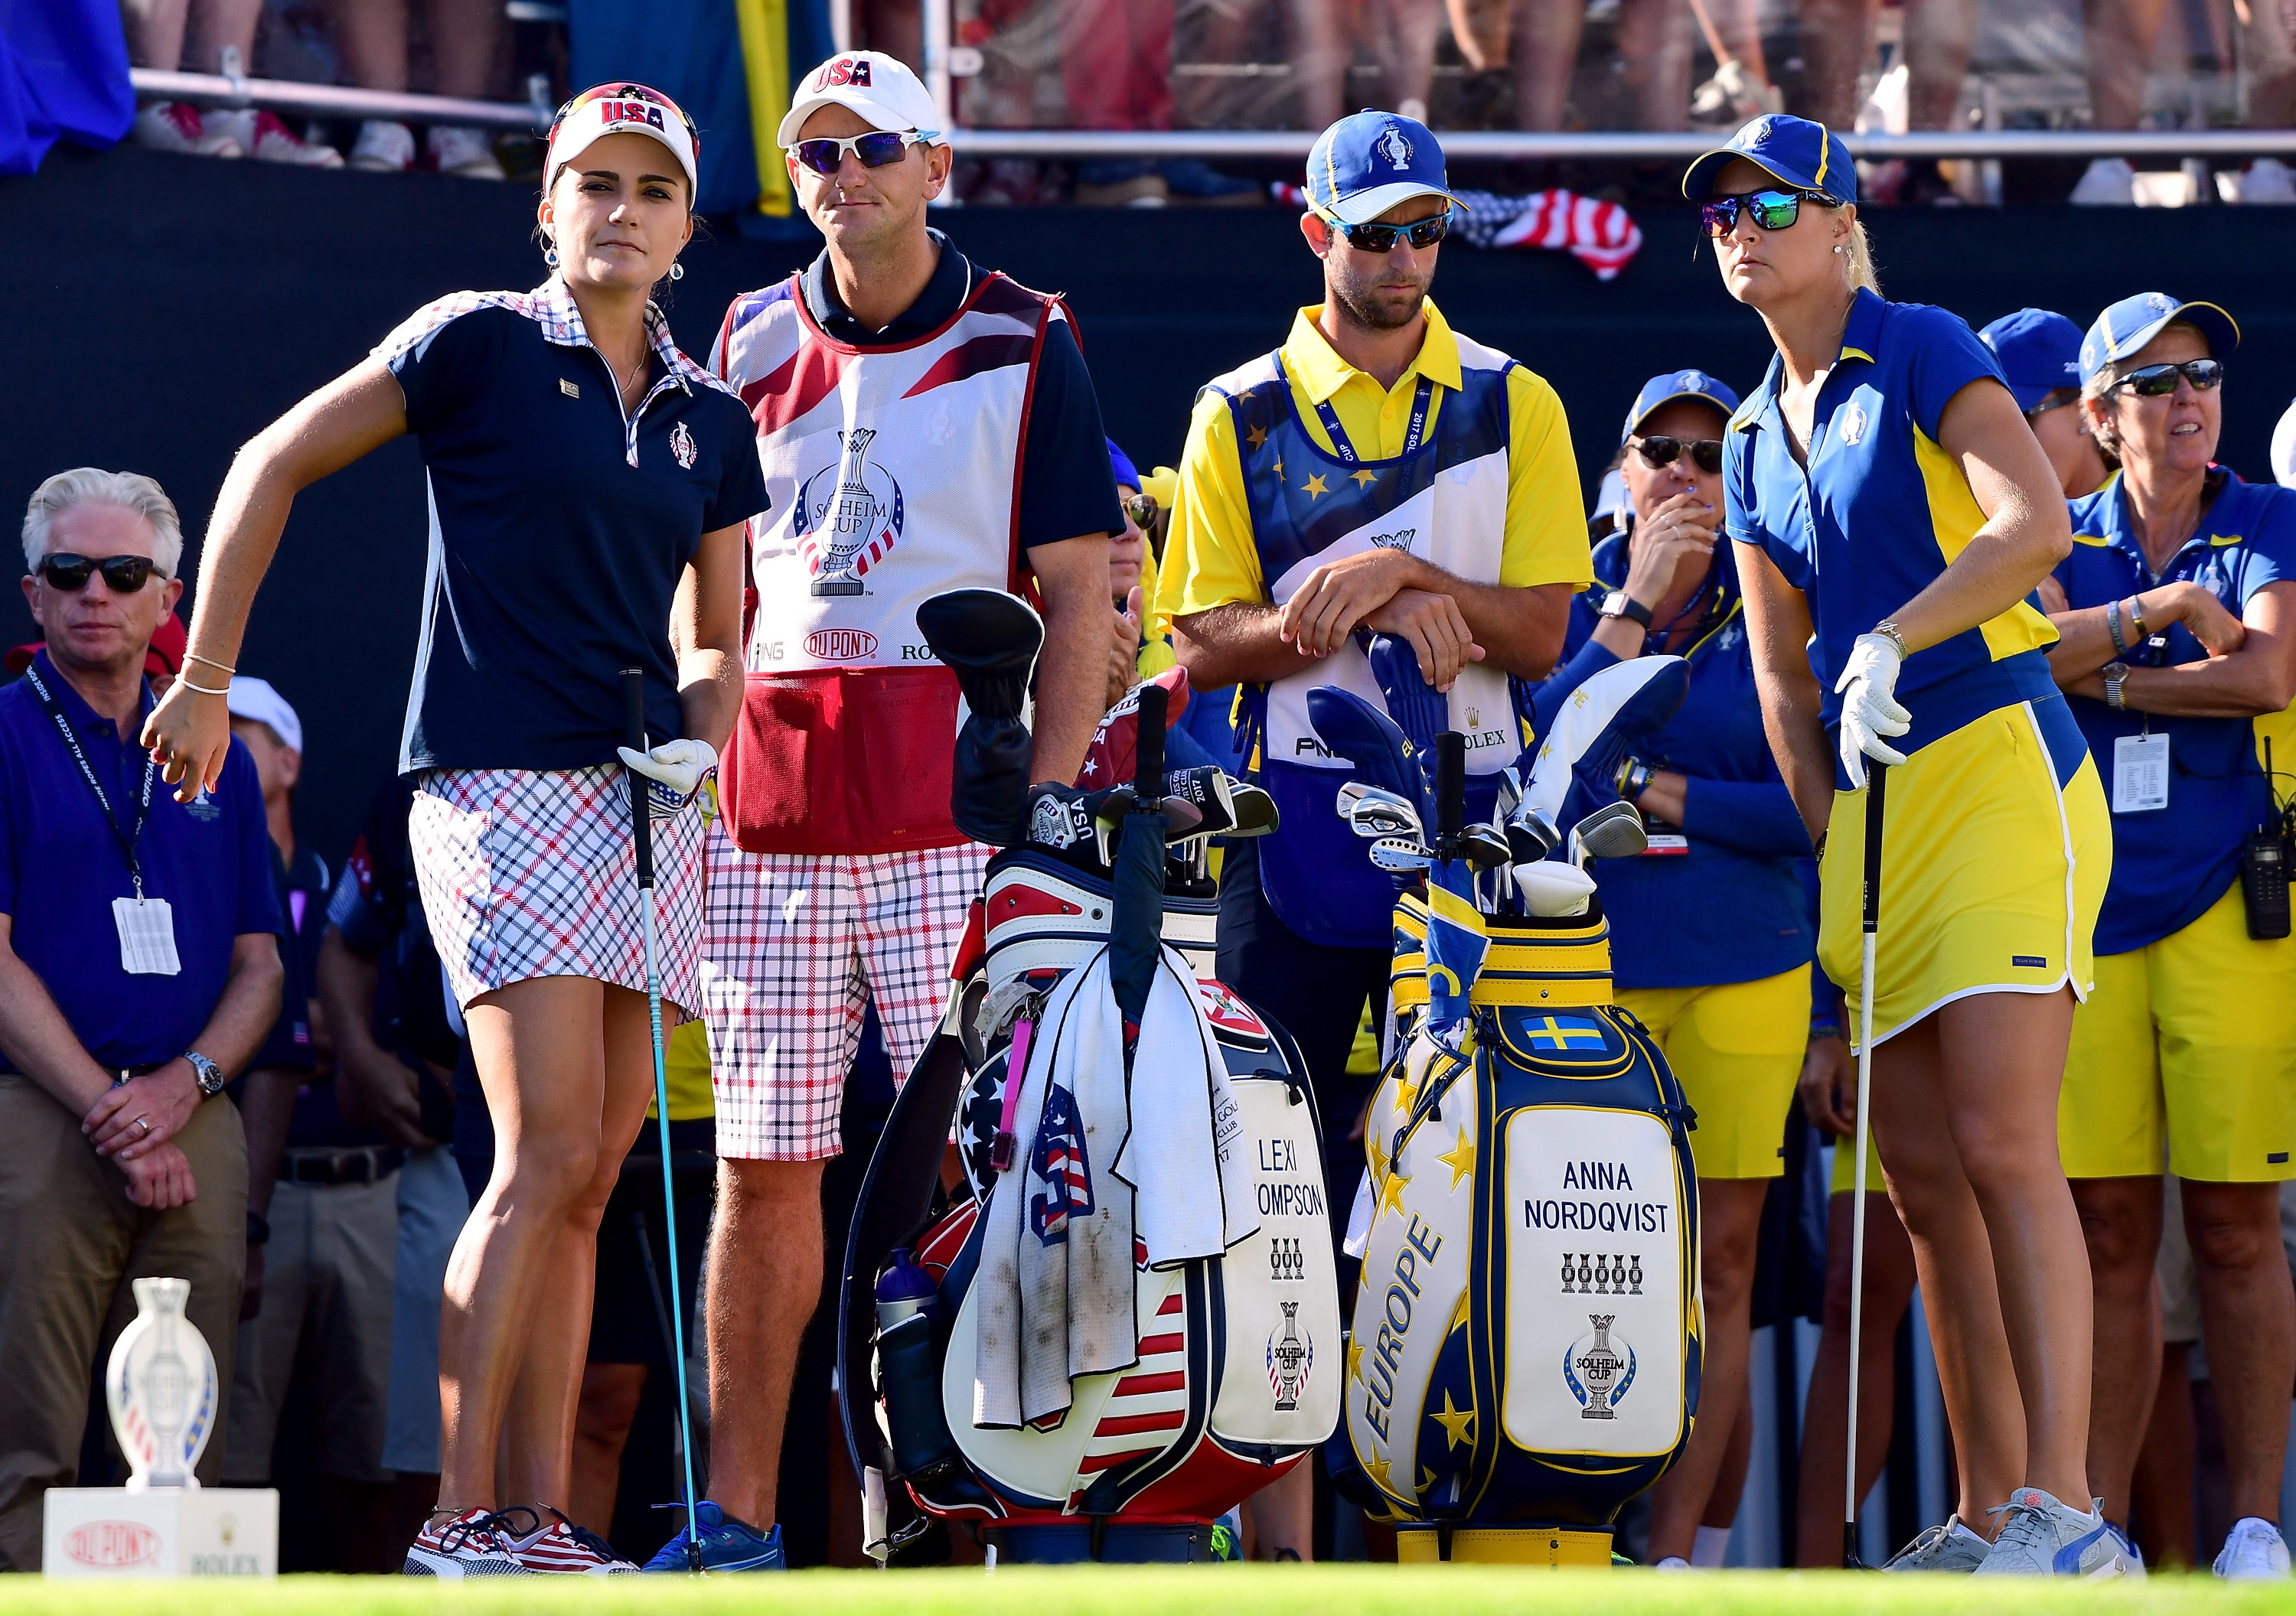 It is hoped the arrival of the world's best women golfers in September will inspire more people to take up the sport.